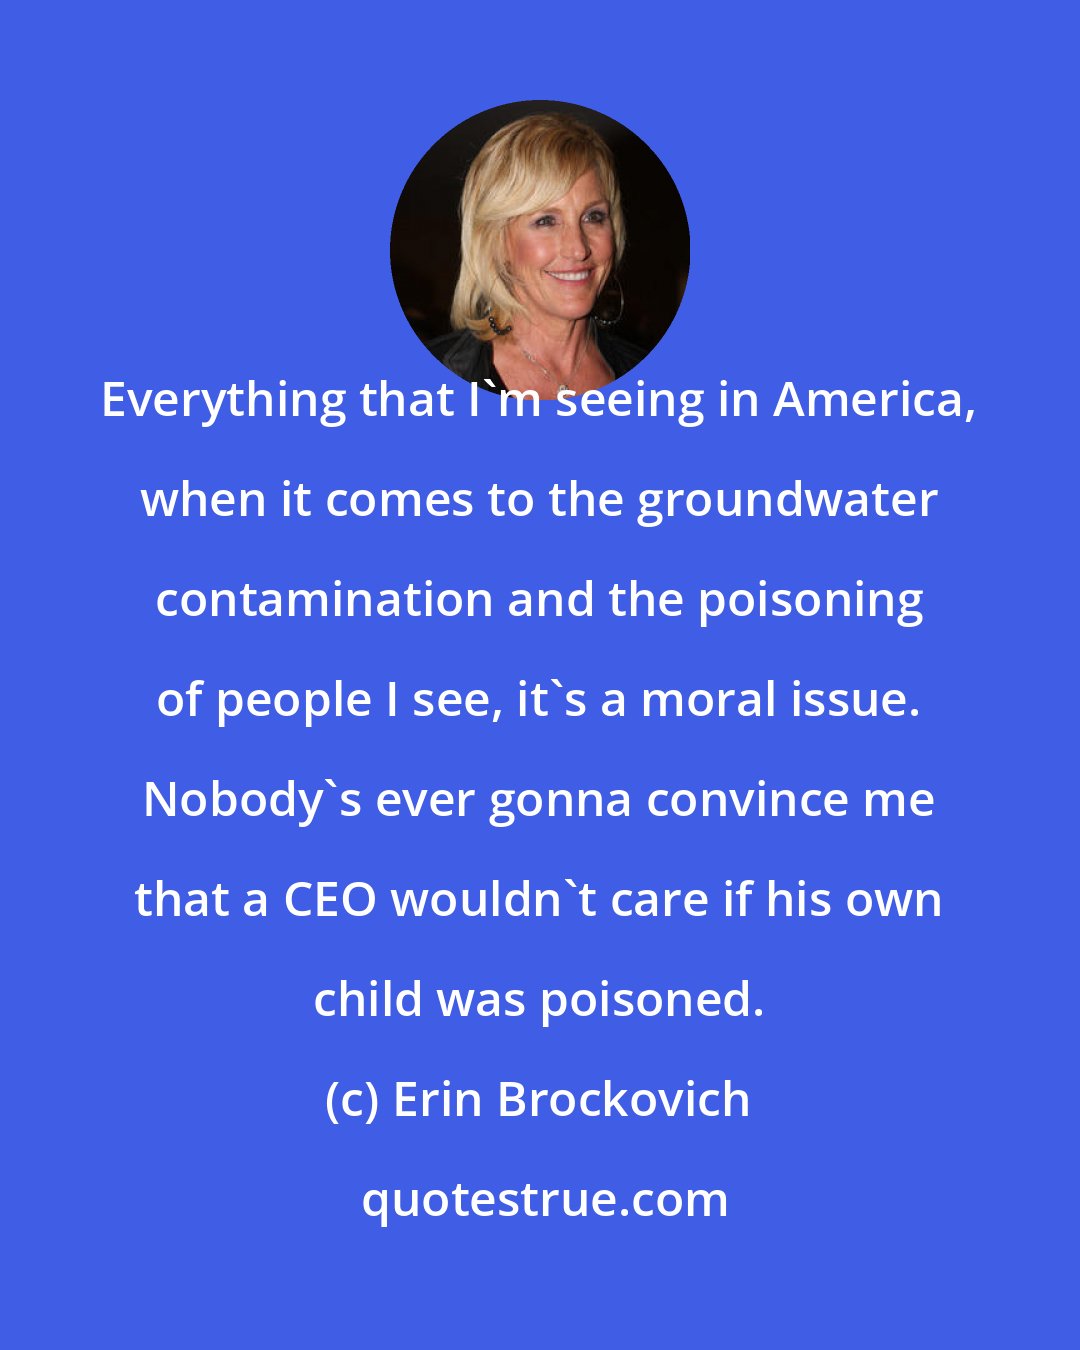 Erin Brockovich: Everything that I'm seeing in America, when it comes to the groundwater contamination and the poisoning of people I see, it's a moral issue. Nobody's ever gonna convince me that a CEO wouldn't care if his own child was poisoned.